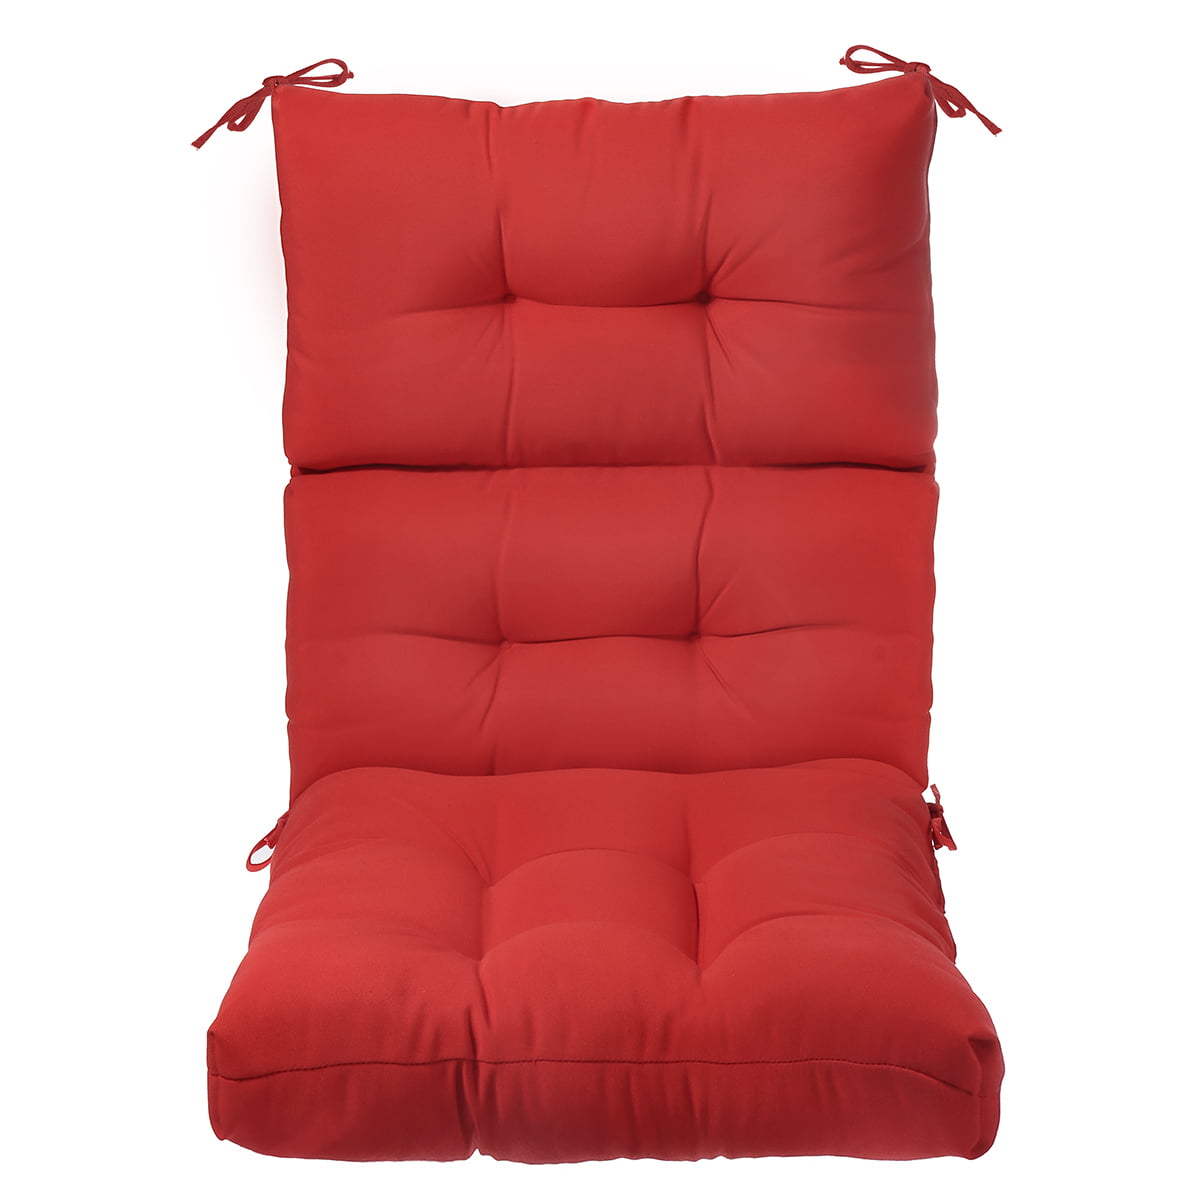 Details about   Outdoor Dining Chair Cushion High Back Solid High Rebound Foam Waterproof Soft 